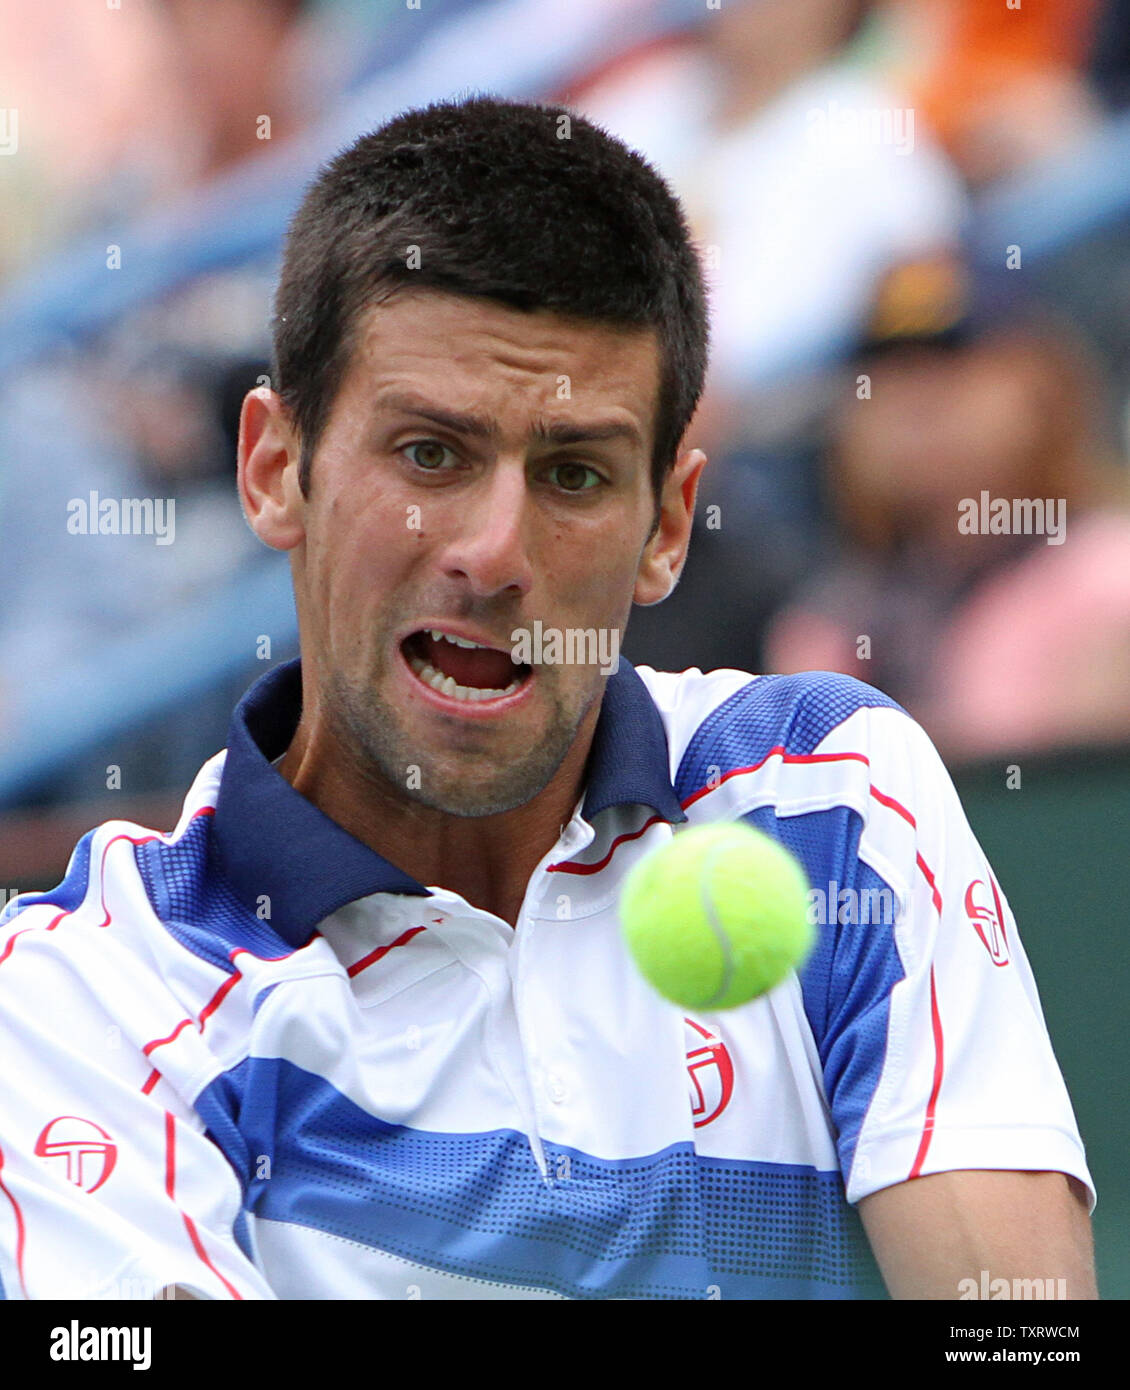 Serbian Novak Djokovic watches the ball while hitting a shot during his mens final match against Spaniard Rafael Nadal at the BNP Paribas Open in Indian Wells, California on March 20, 2011.  Djokovic defeated Nadal 4-6, 6-3, 6-2 to win the tournament.   UPI/David Silpa Stock Photo